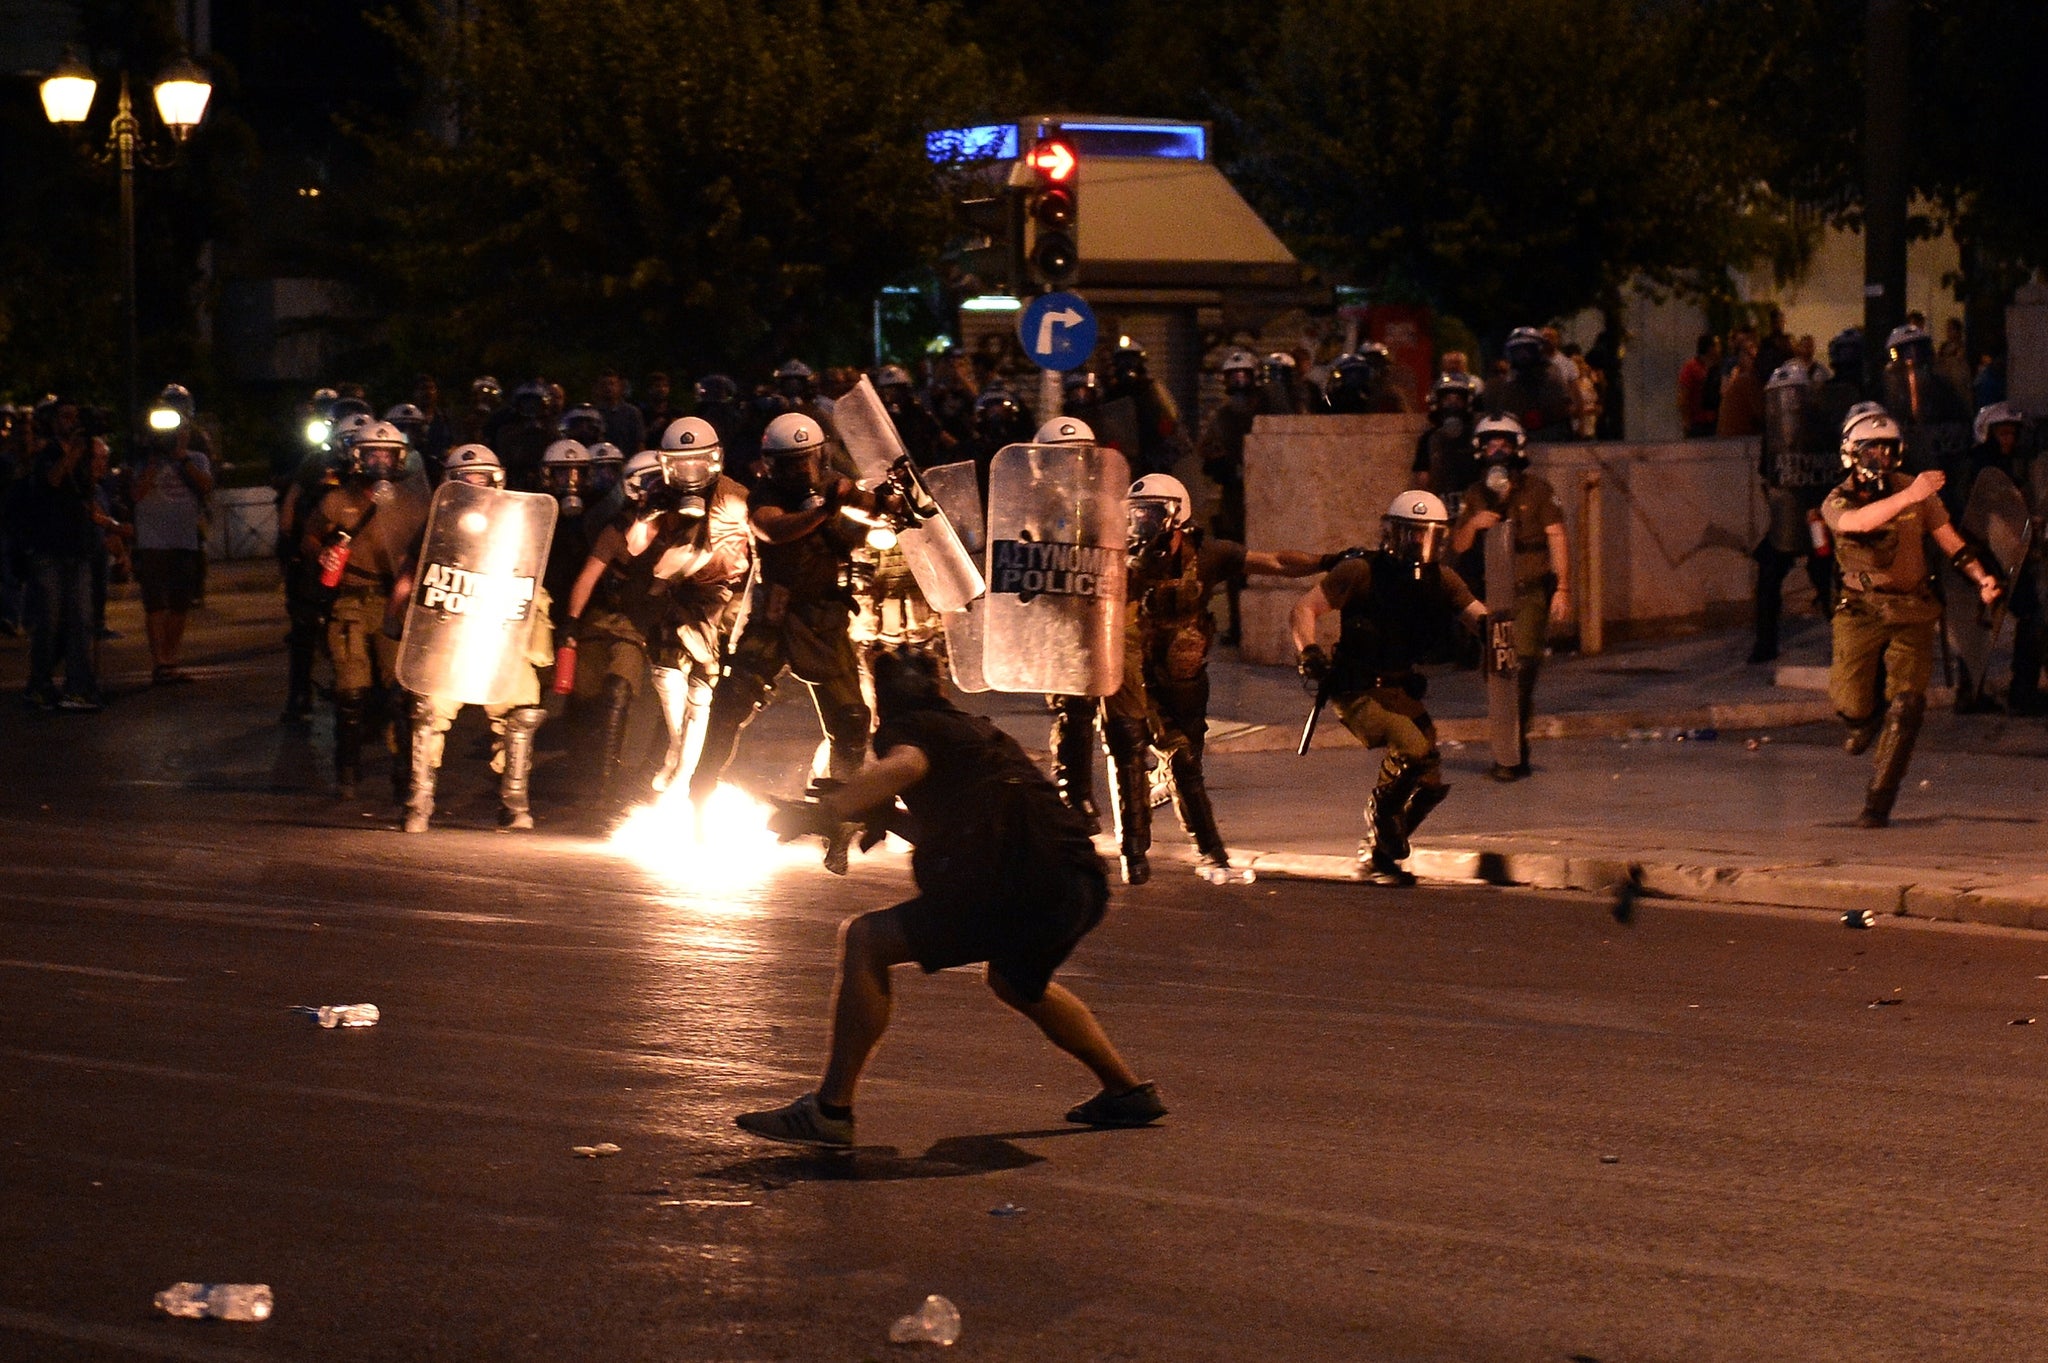 The unrest comes after weeks of peaceful political rallies during the crisis